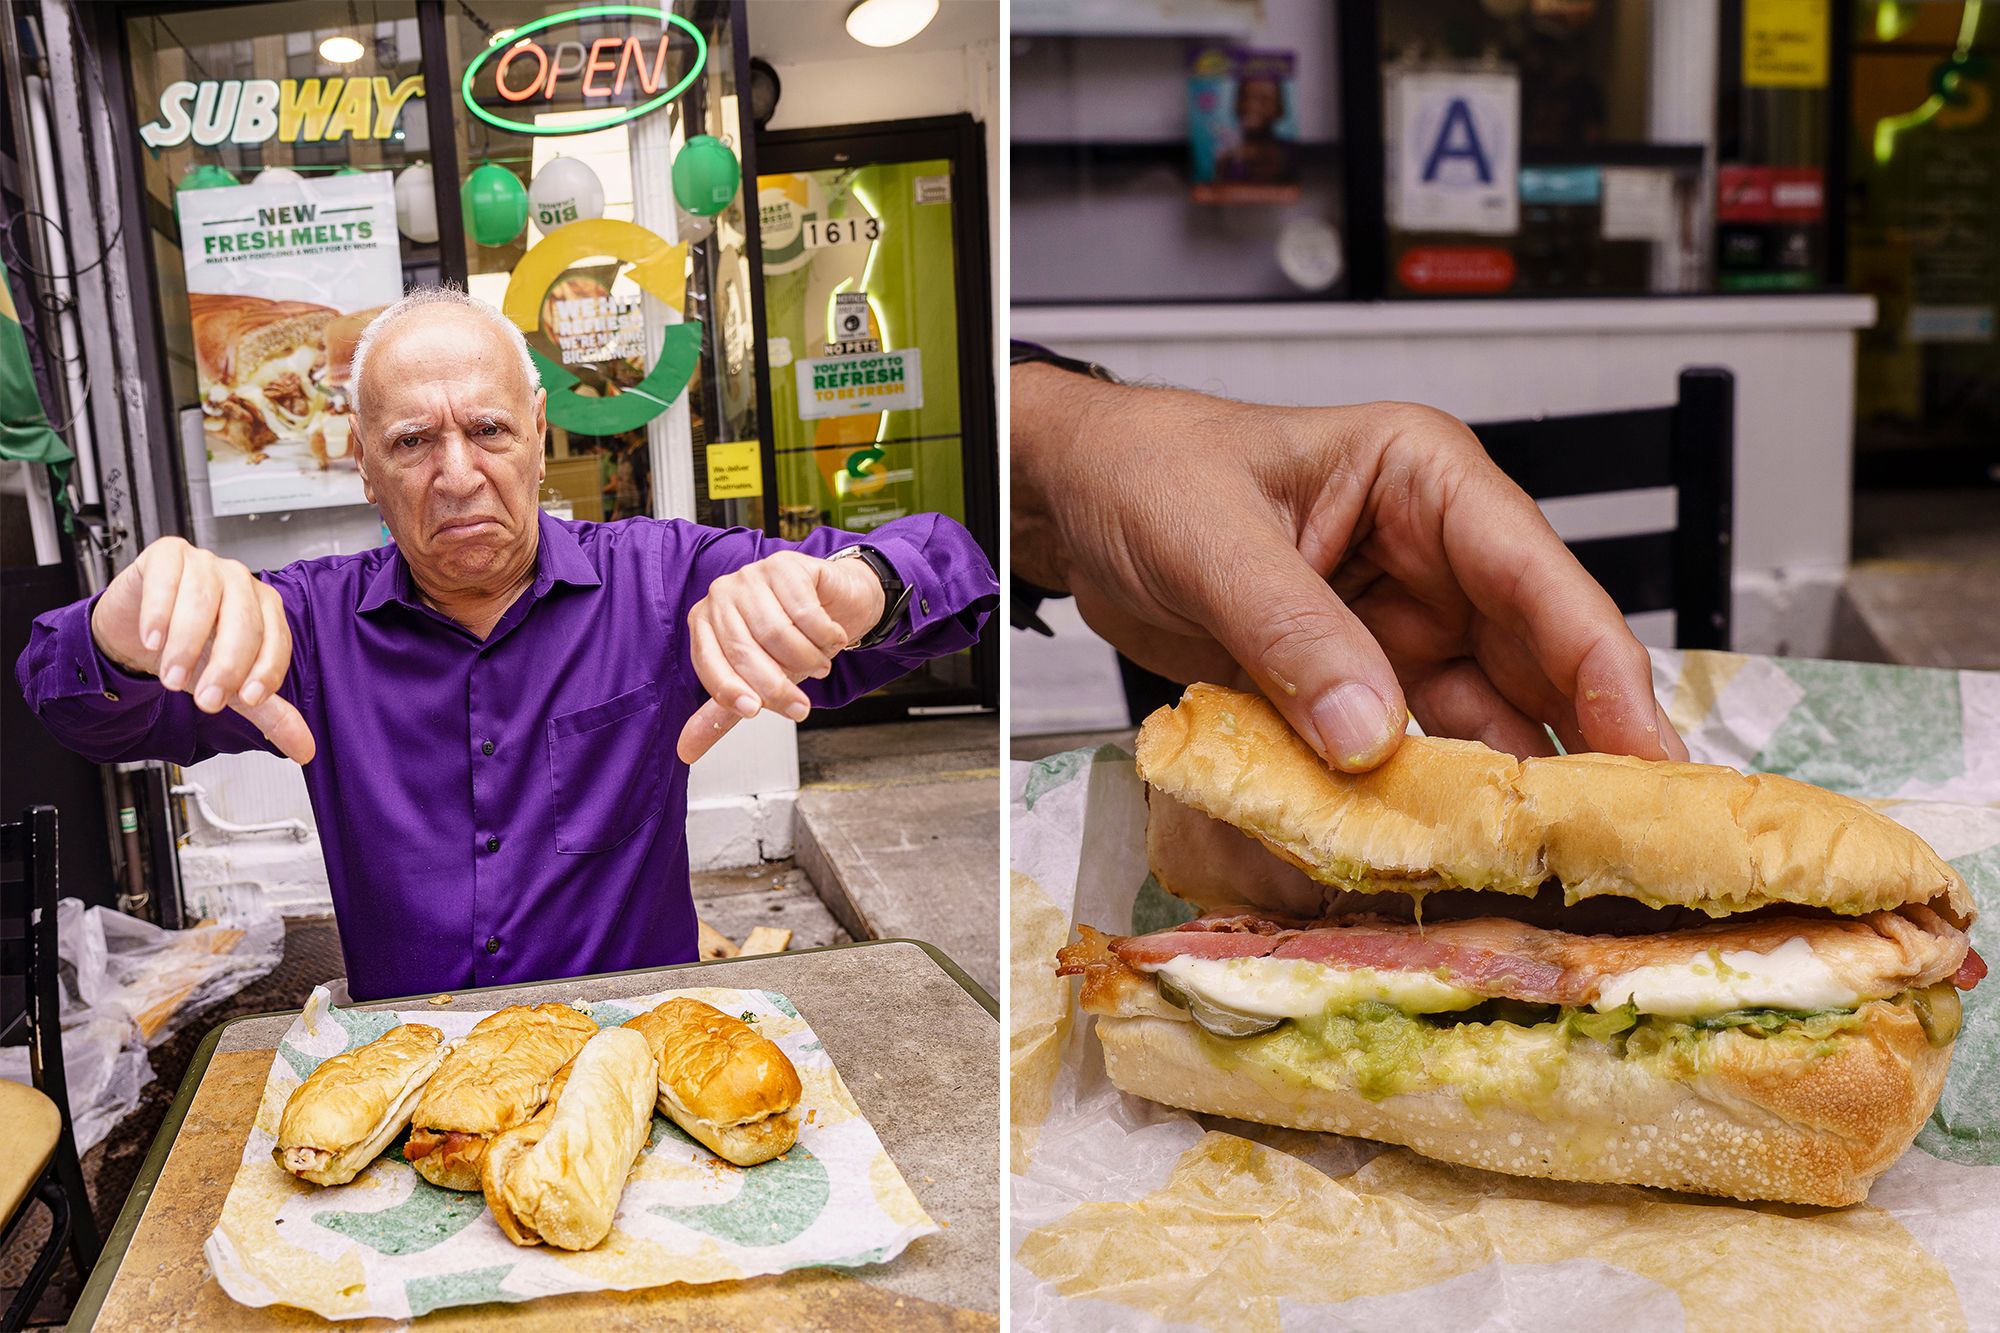 crimes against food  - thinking subway is a deli